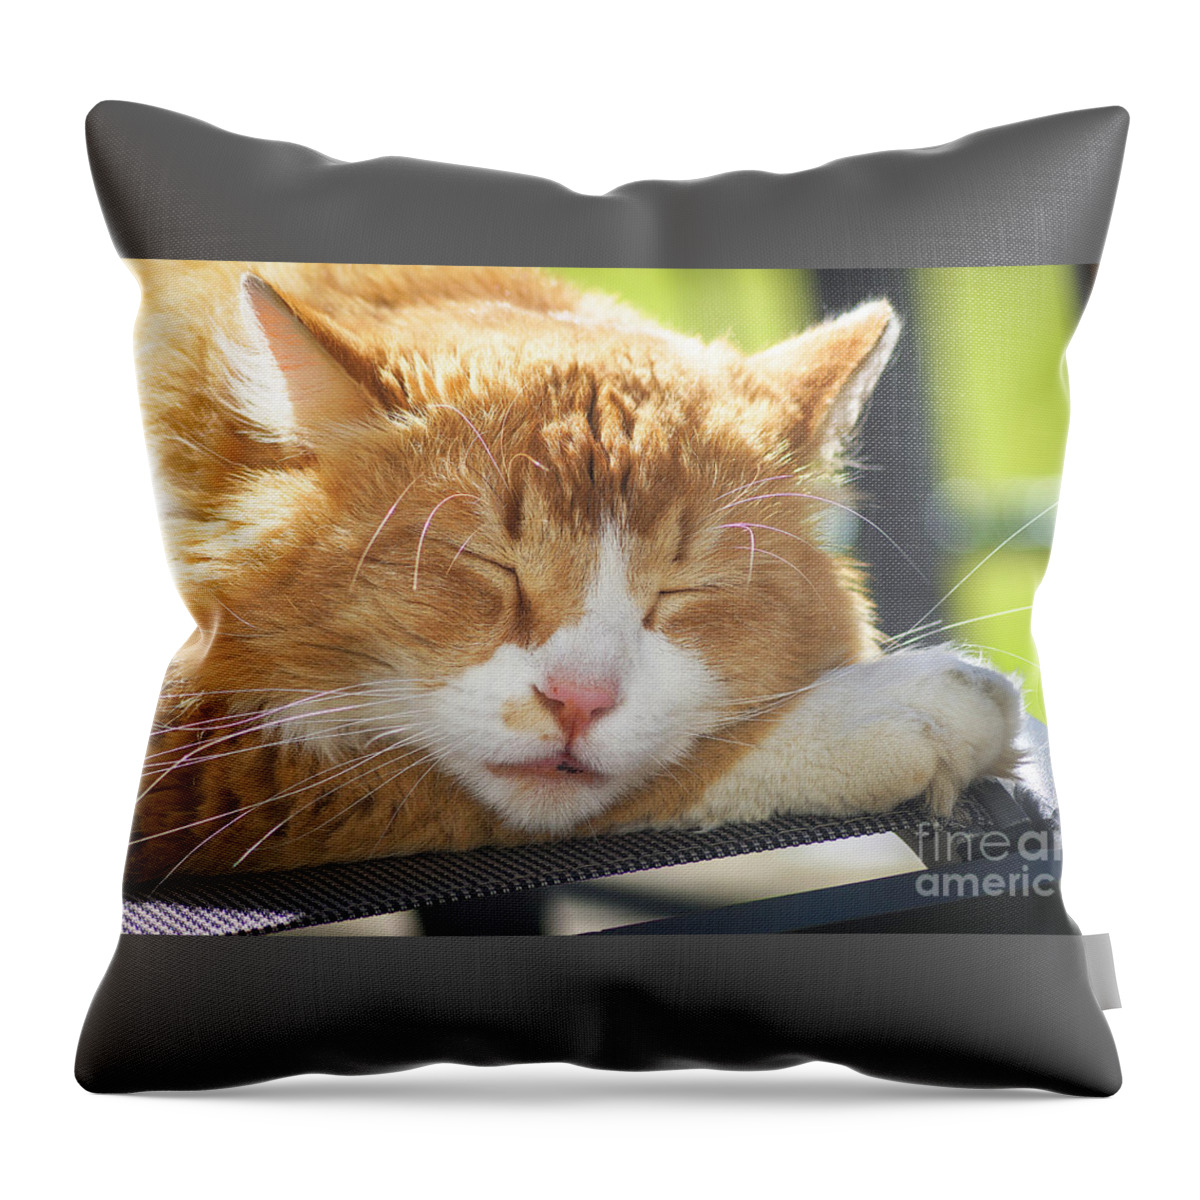 Animal Throw Pillow featuring the photograph Cat Taking A Nap by Claudia Zahnd-Prezioso